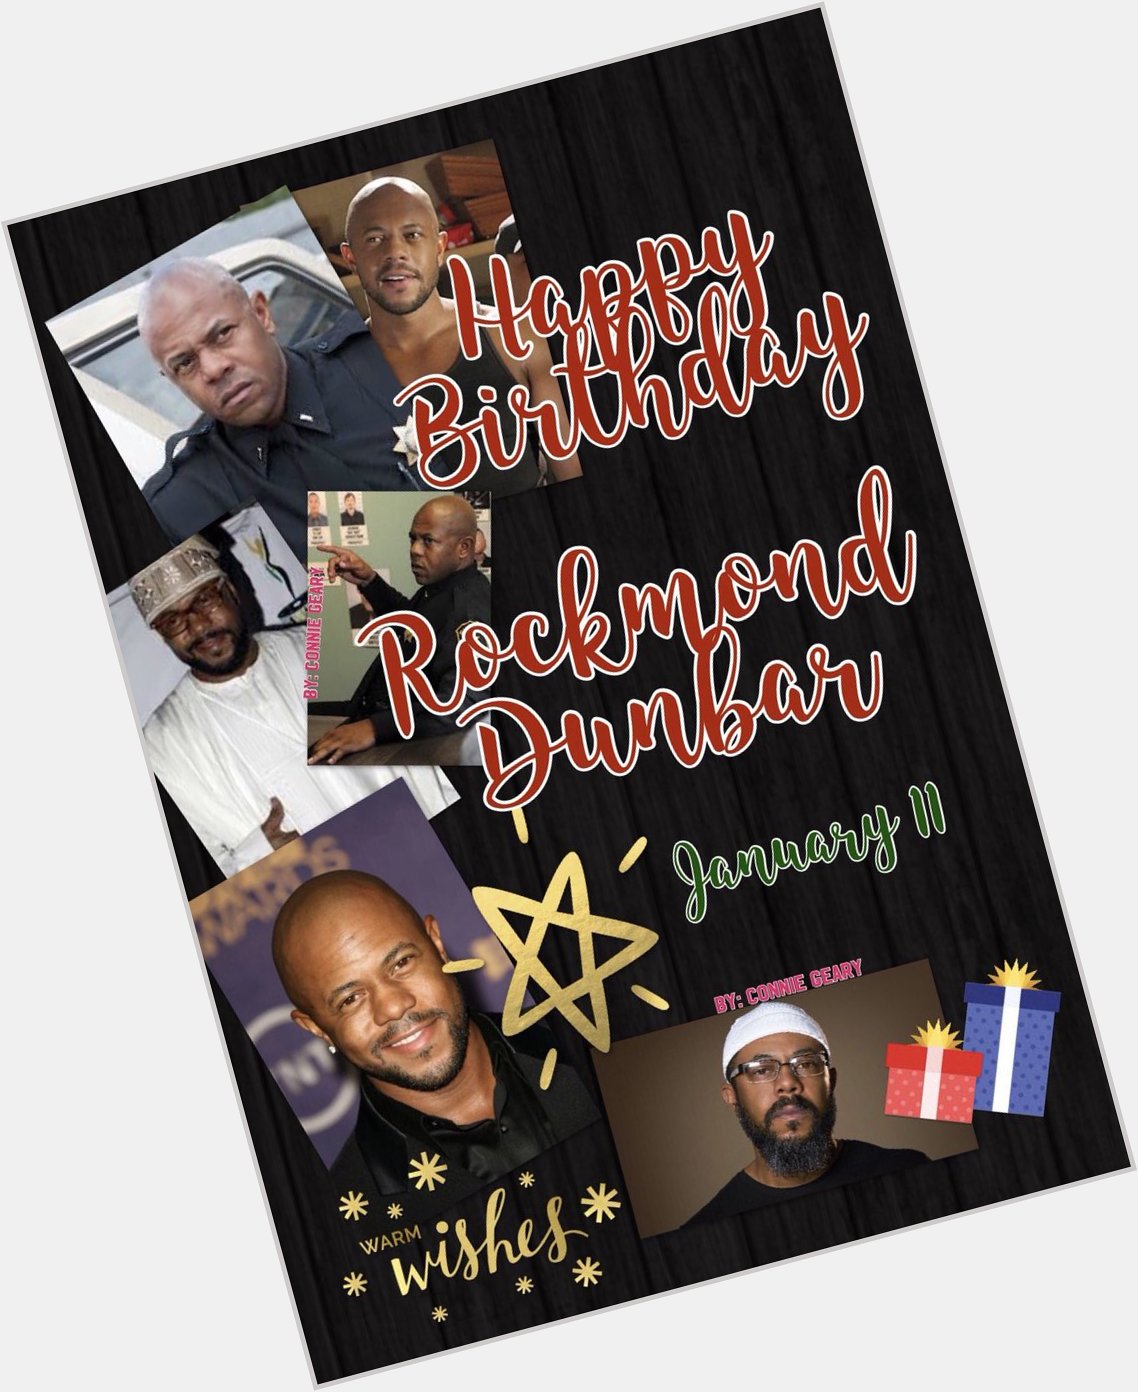 Please join in wishing Rockmond Dunbar (SOAs Roosevelt) a very Happy Birthday with many more to come - 